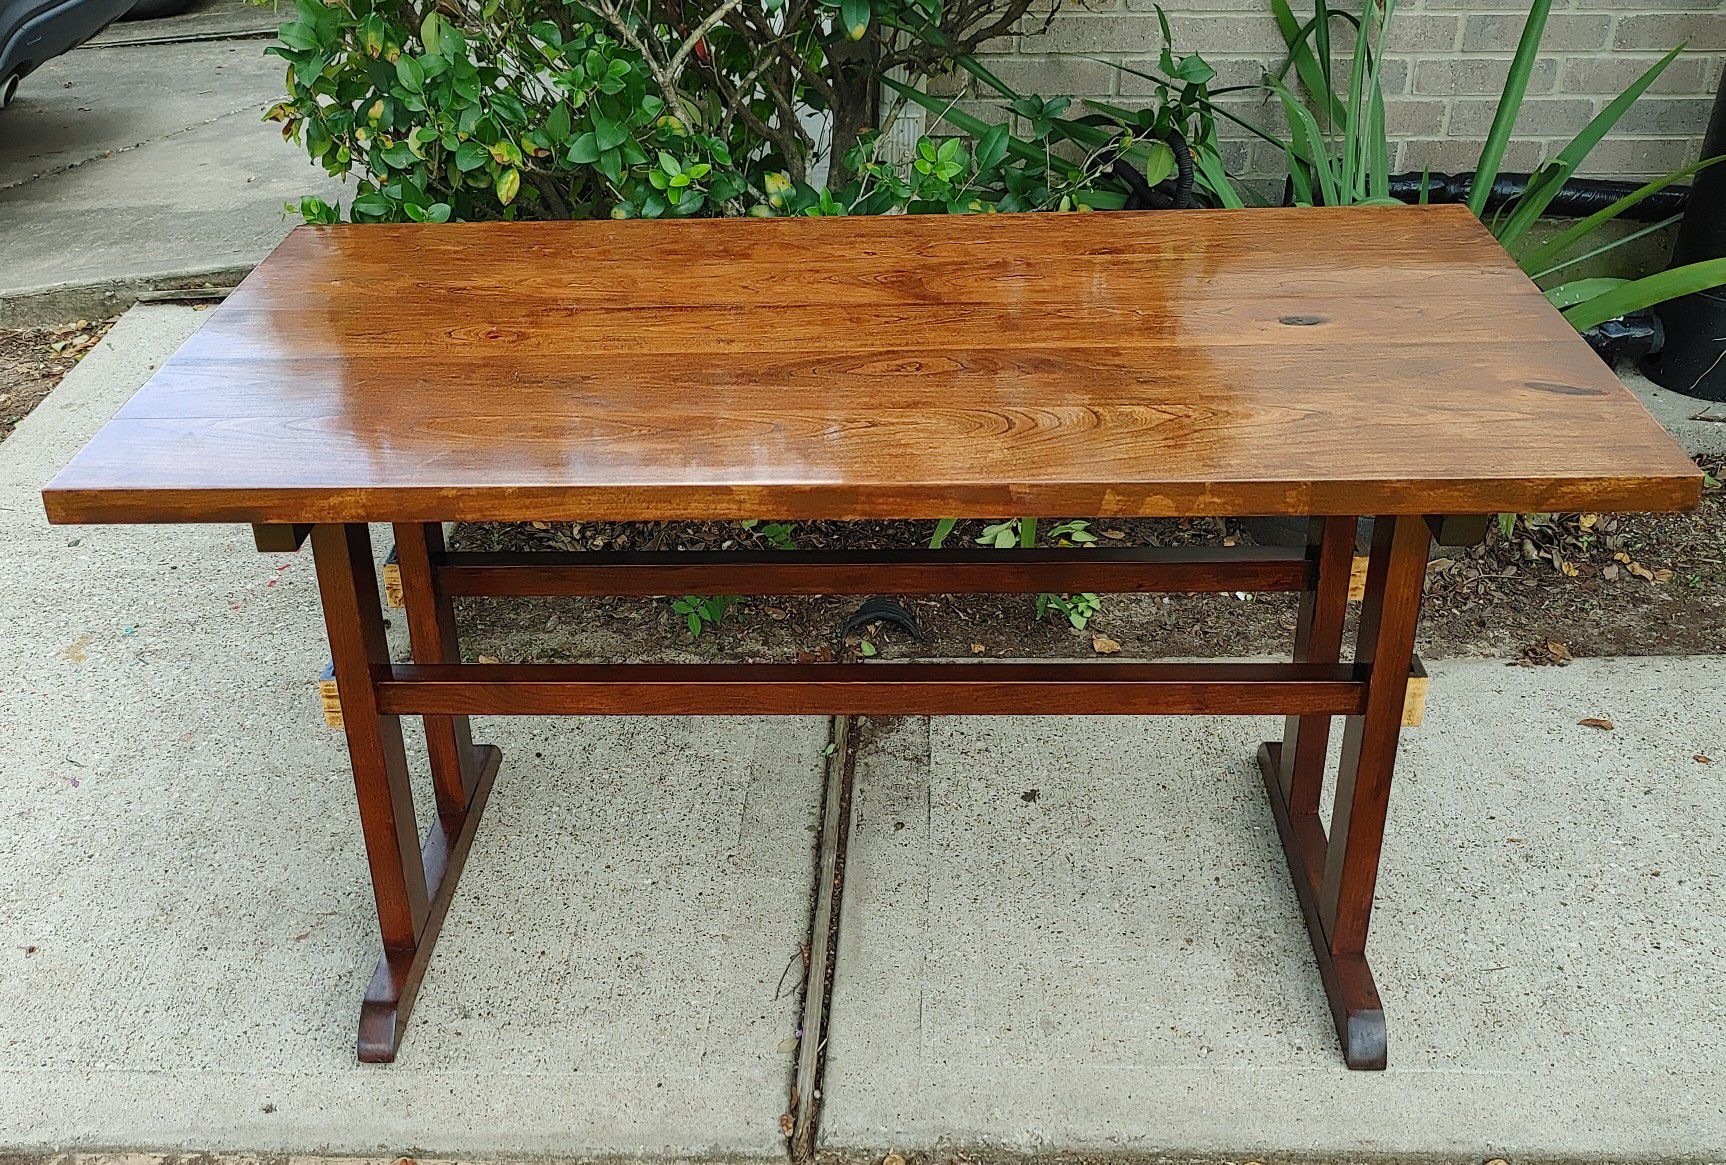 Small Cherry Wood Kitchen Table!